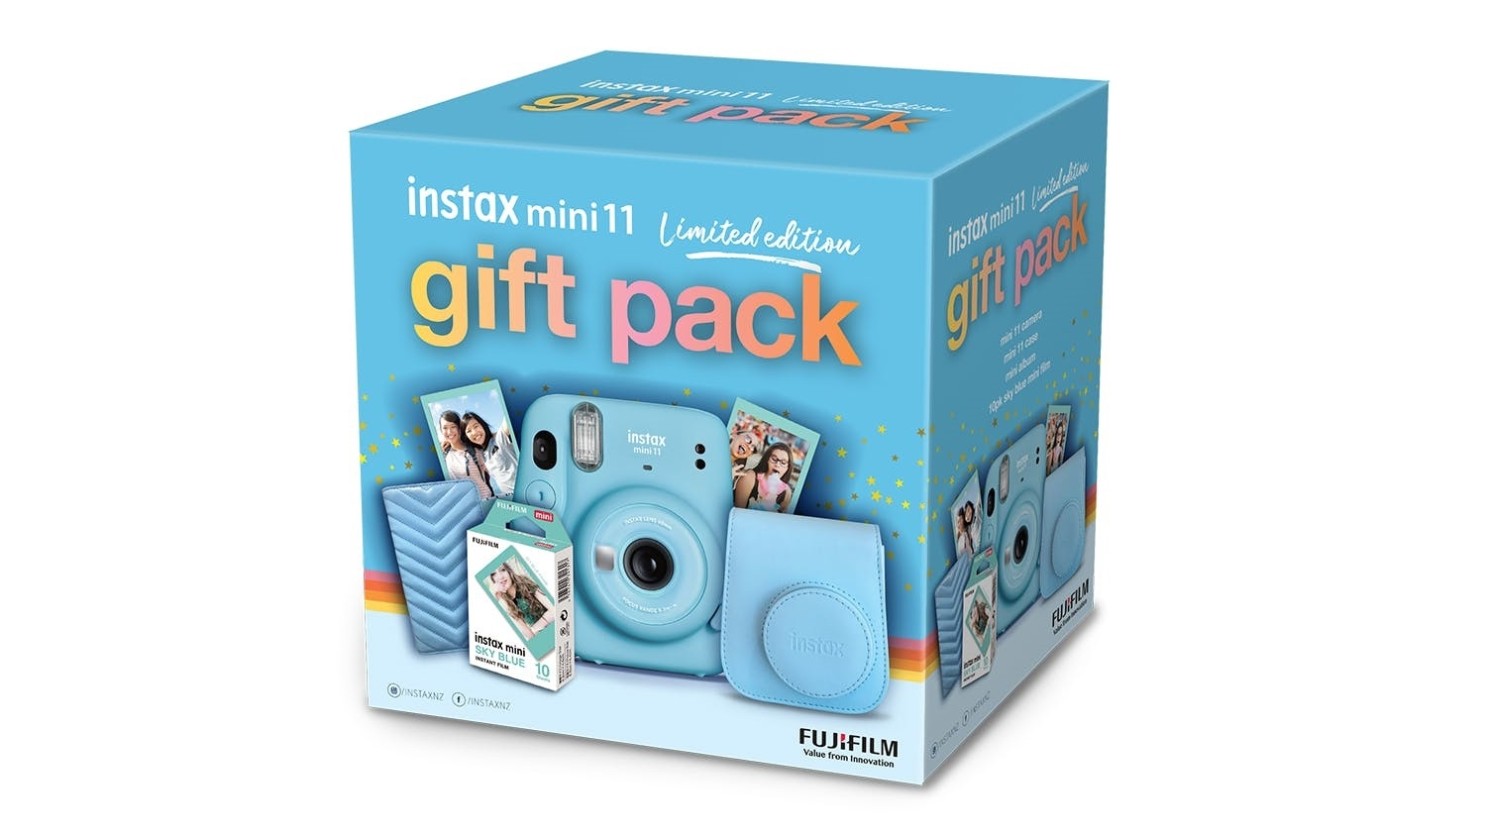 Fujifilm Instax Mini 11 Limited Edition Gift Pack (Blue)